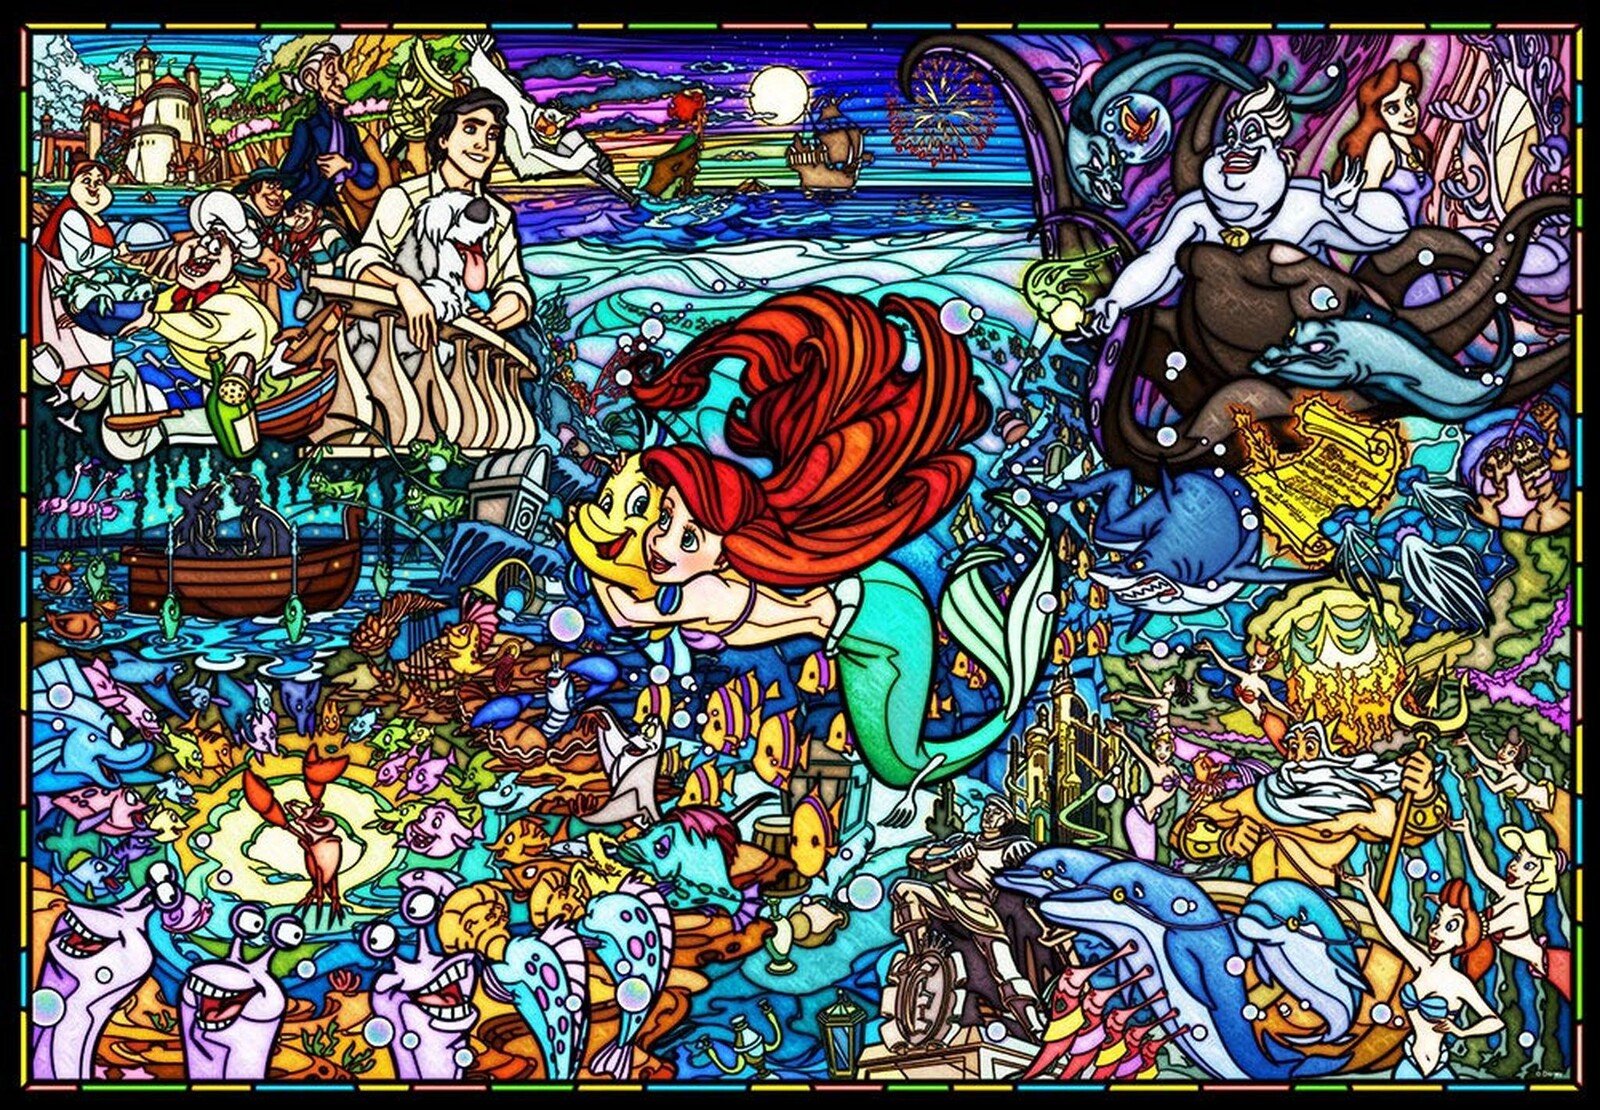 the Little Mermaid Story Stained Glass Puzzle 1000 pieces - Tenyo Puzzle Disney